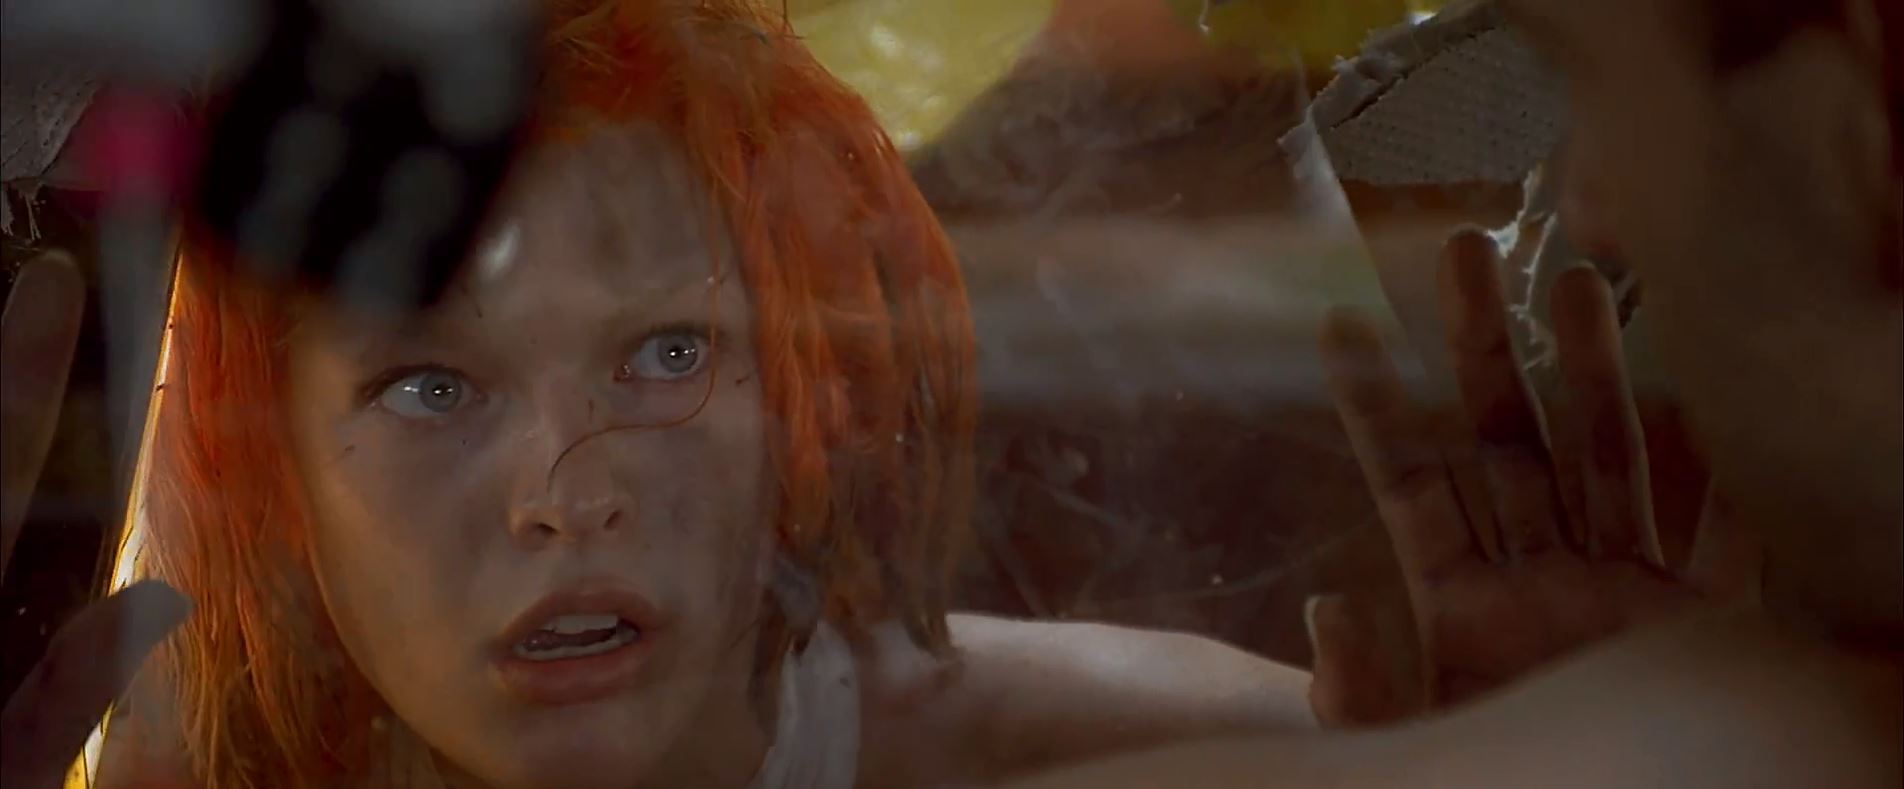 leeloo in the taxi cab - The Fifth Element